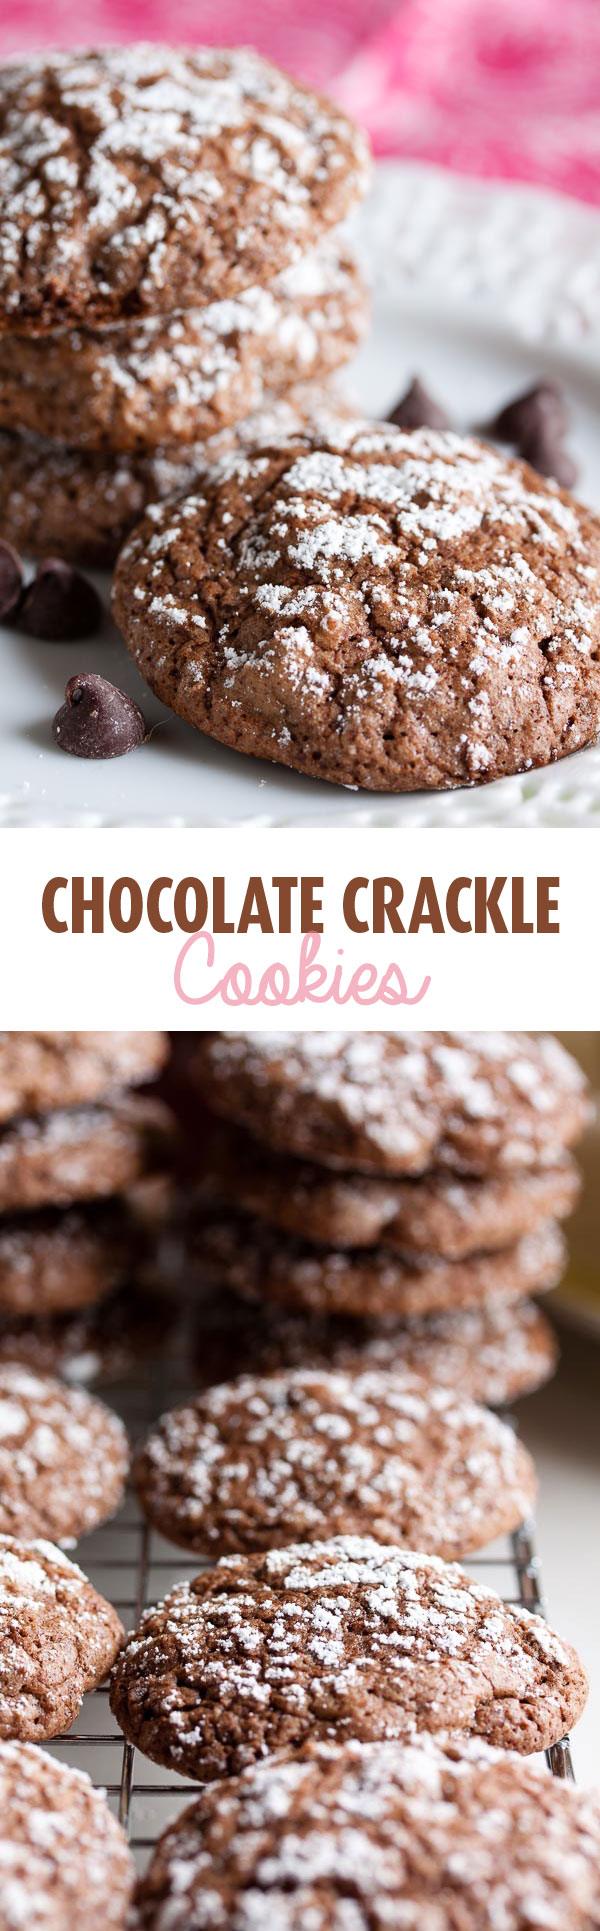 Chocolate Crackles – soft, moist chocolate cookies made even more chocolate-y with chocolate chips. They're like a brownie in cookie form!